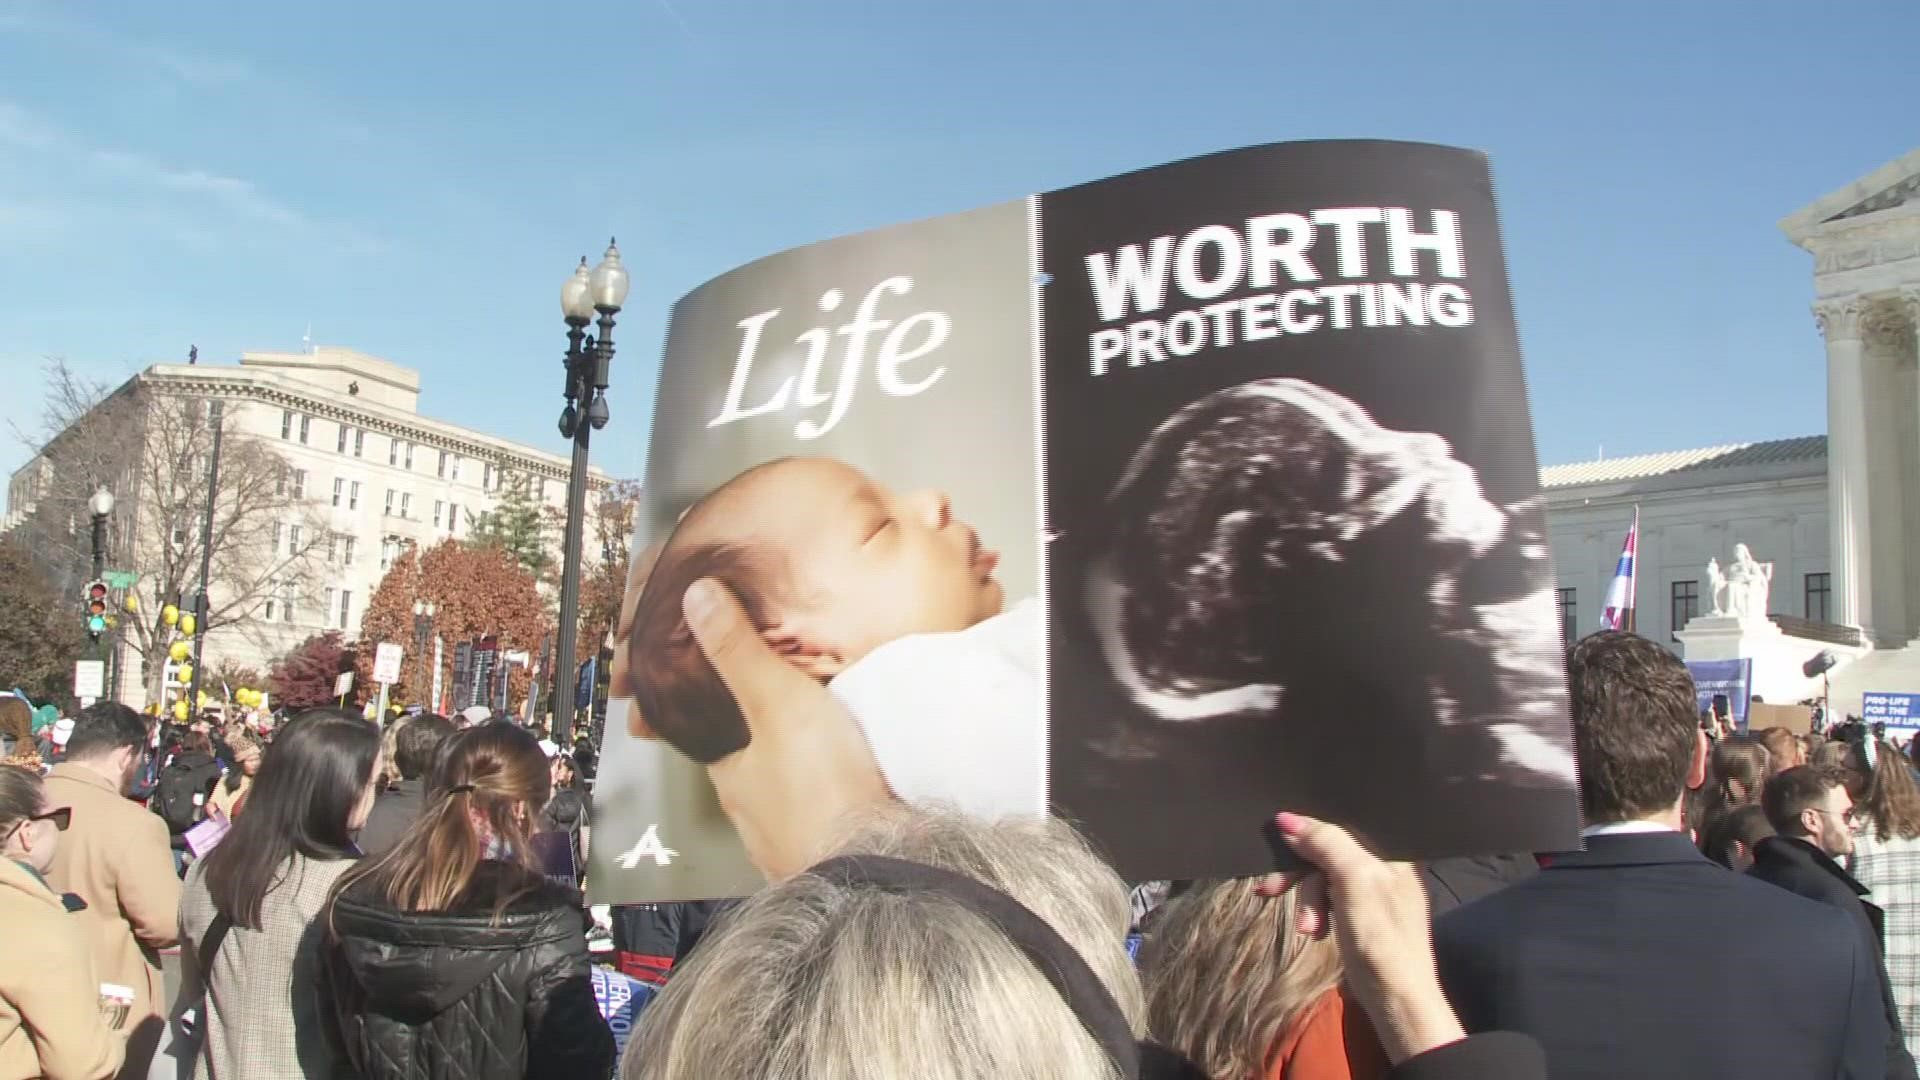 Justices will hear a challenge from Mississippi on Wednesday about banning abortions after 15 weeks.